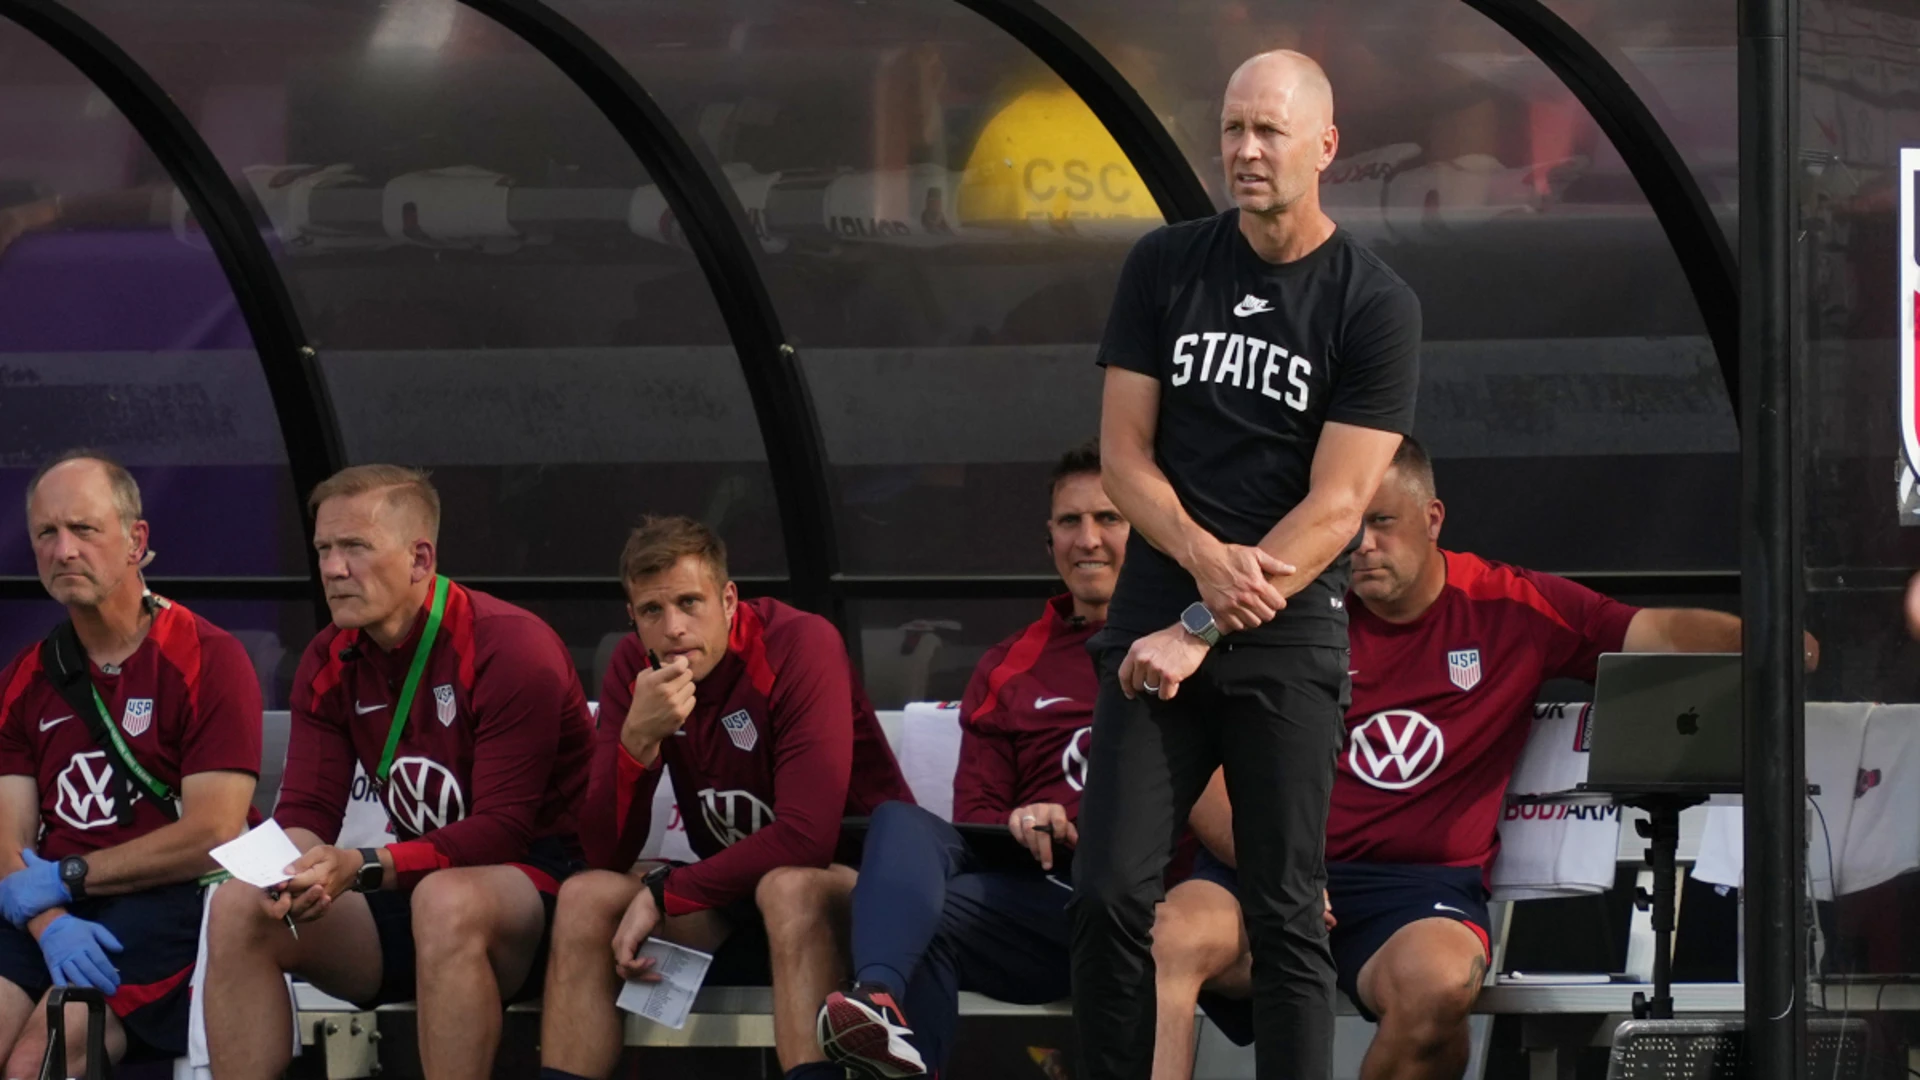 US 'lacked respect' for Colombia in mauling: Berhalter